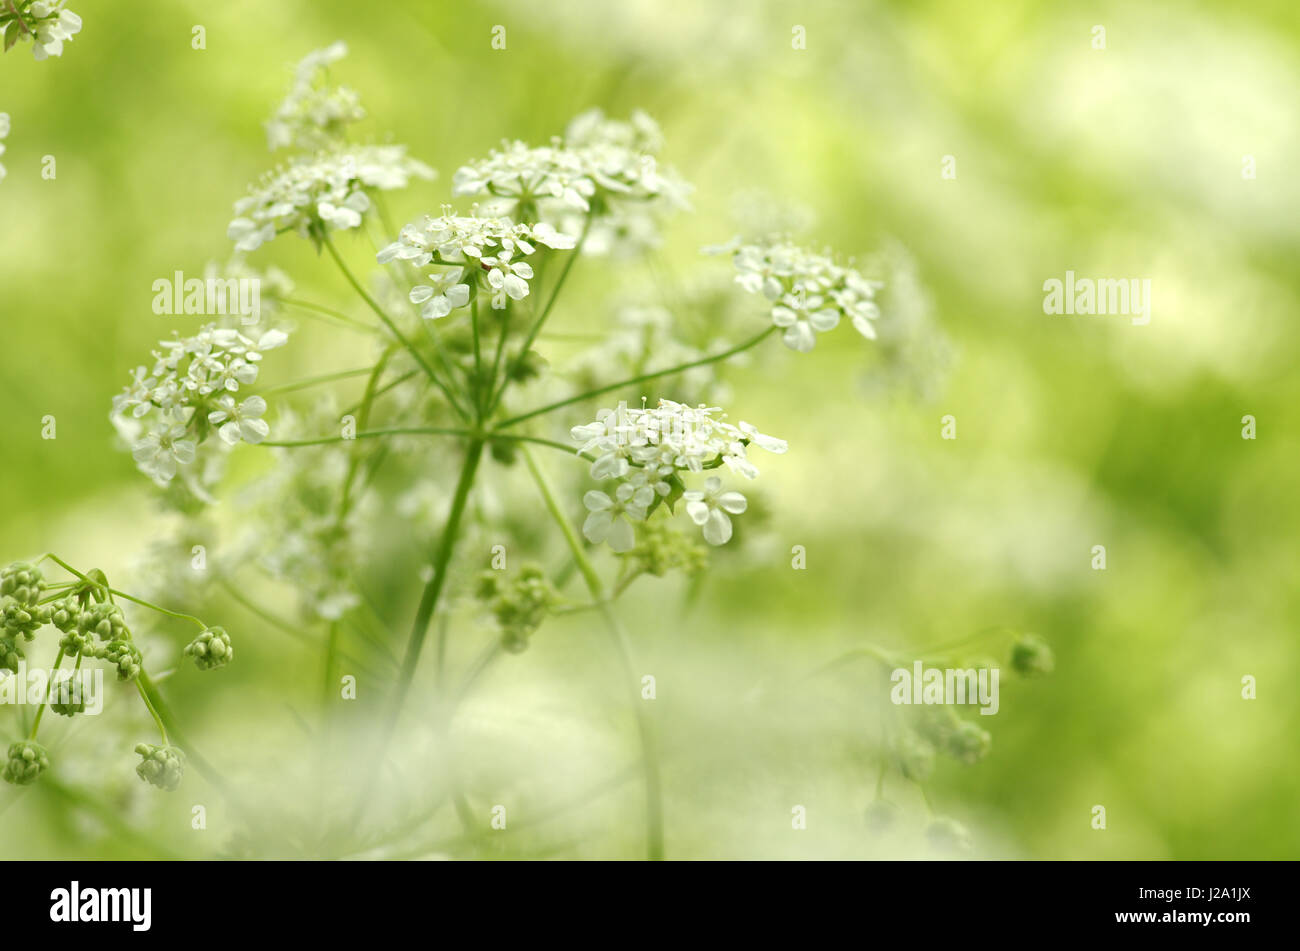 The flowers of Cow Parsley against dreamlike atmosphere Stock Photo